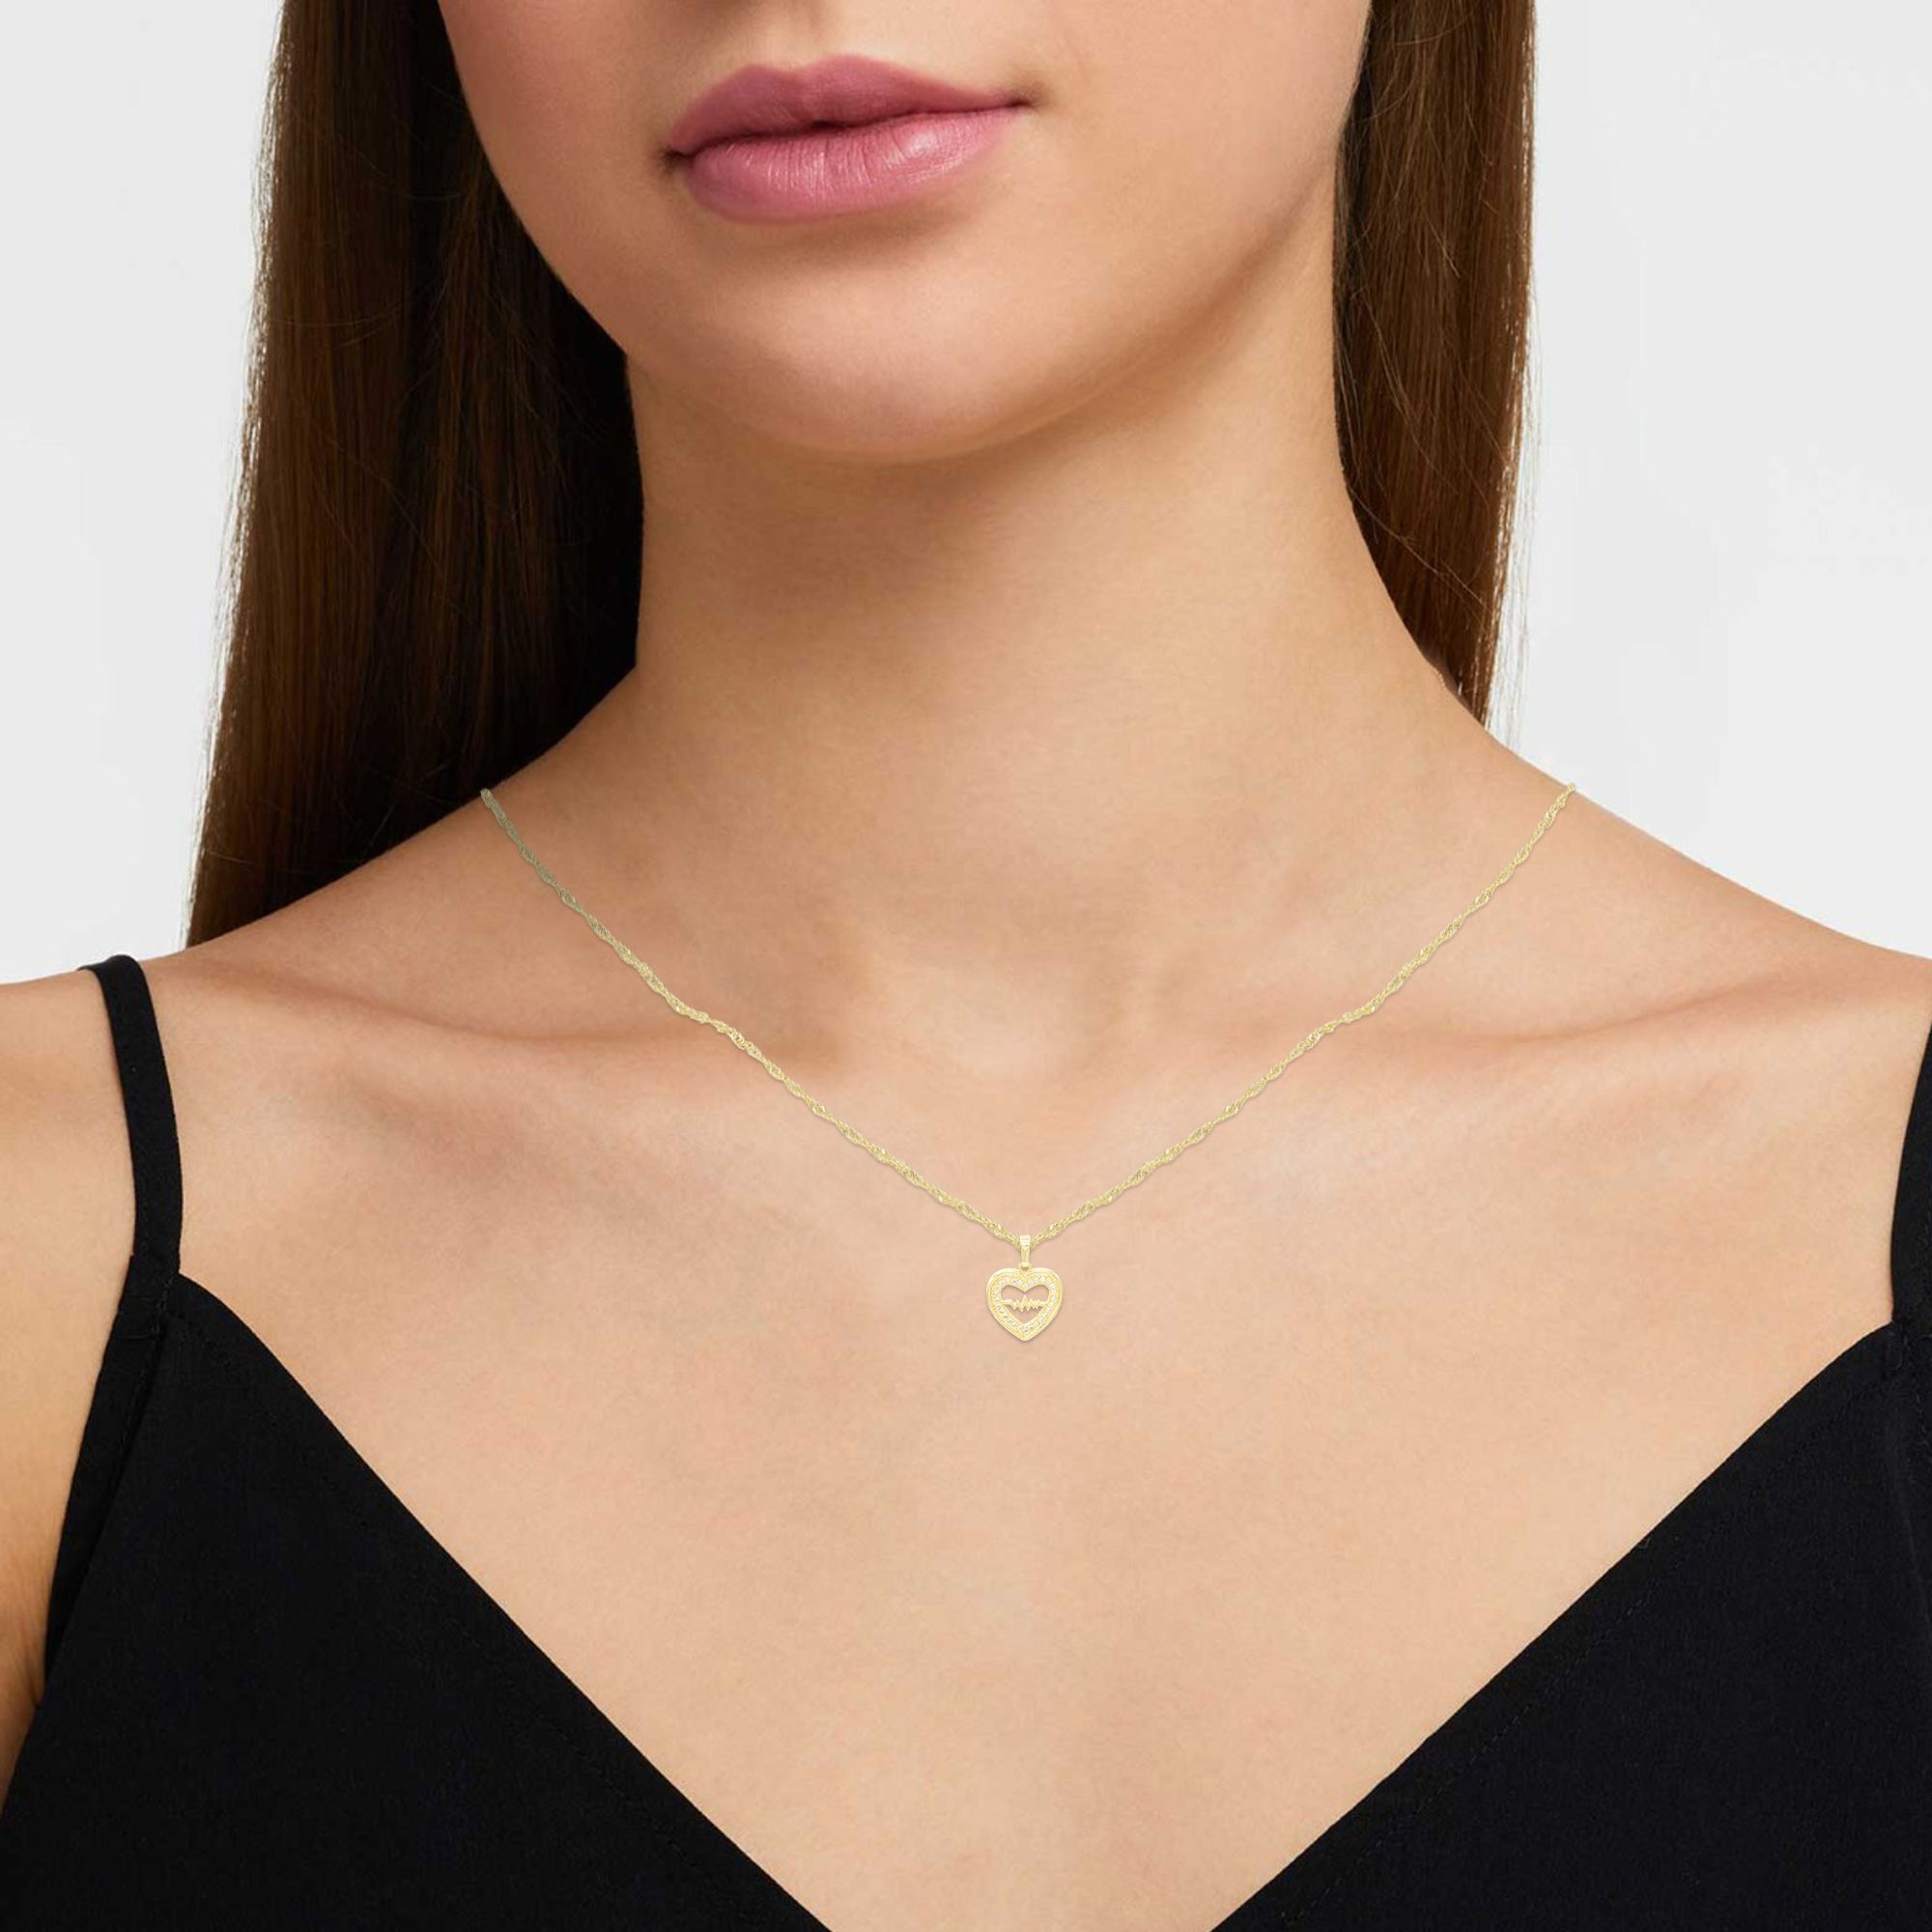 Cubic Zirconia 14K Gold Filled Pulsing Heart Pendant Necklace Set